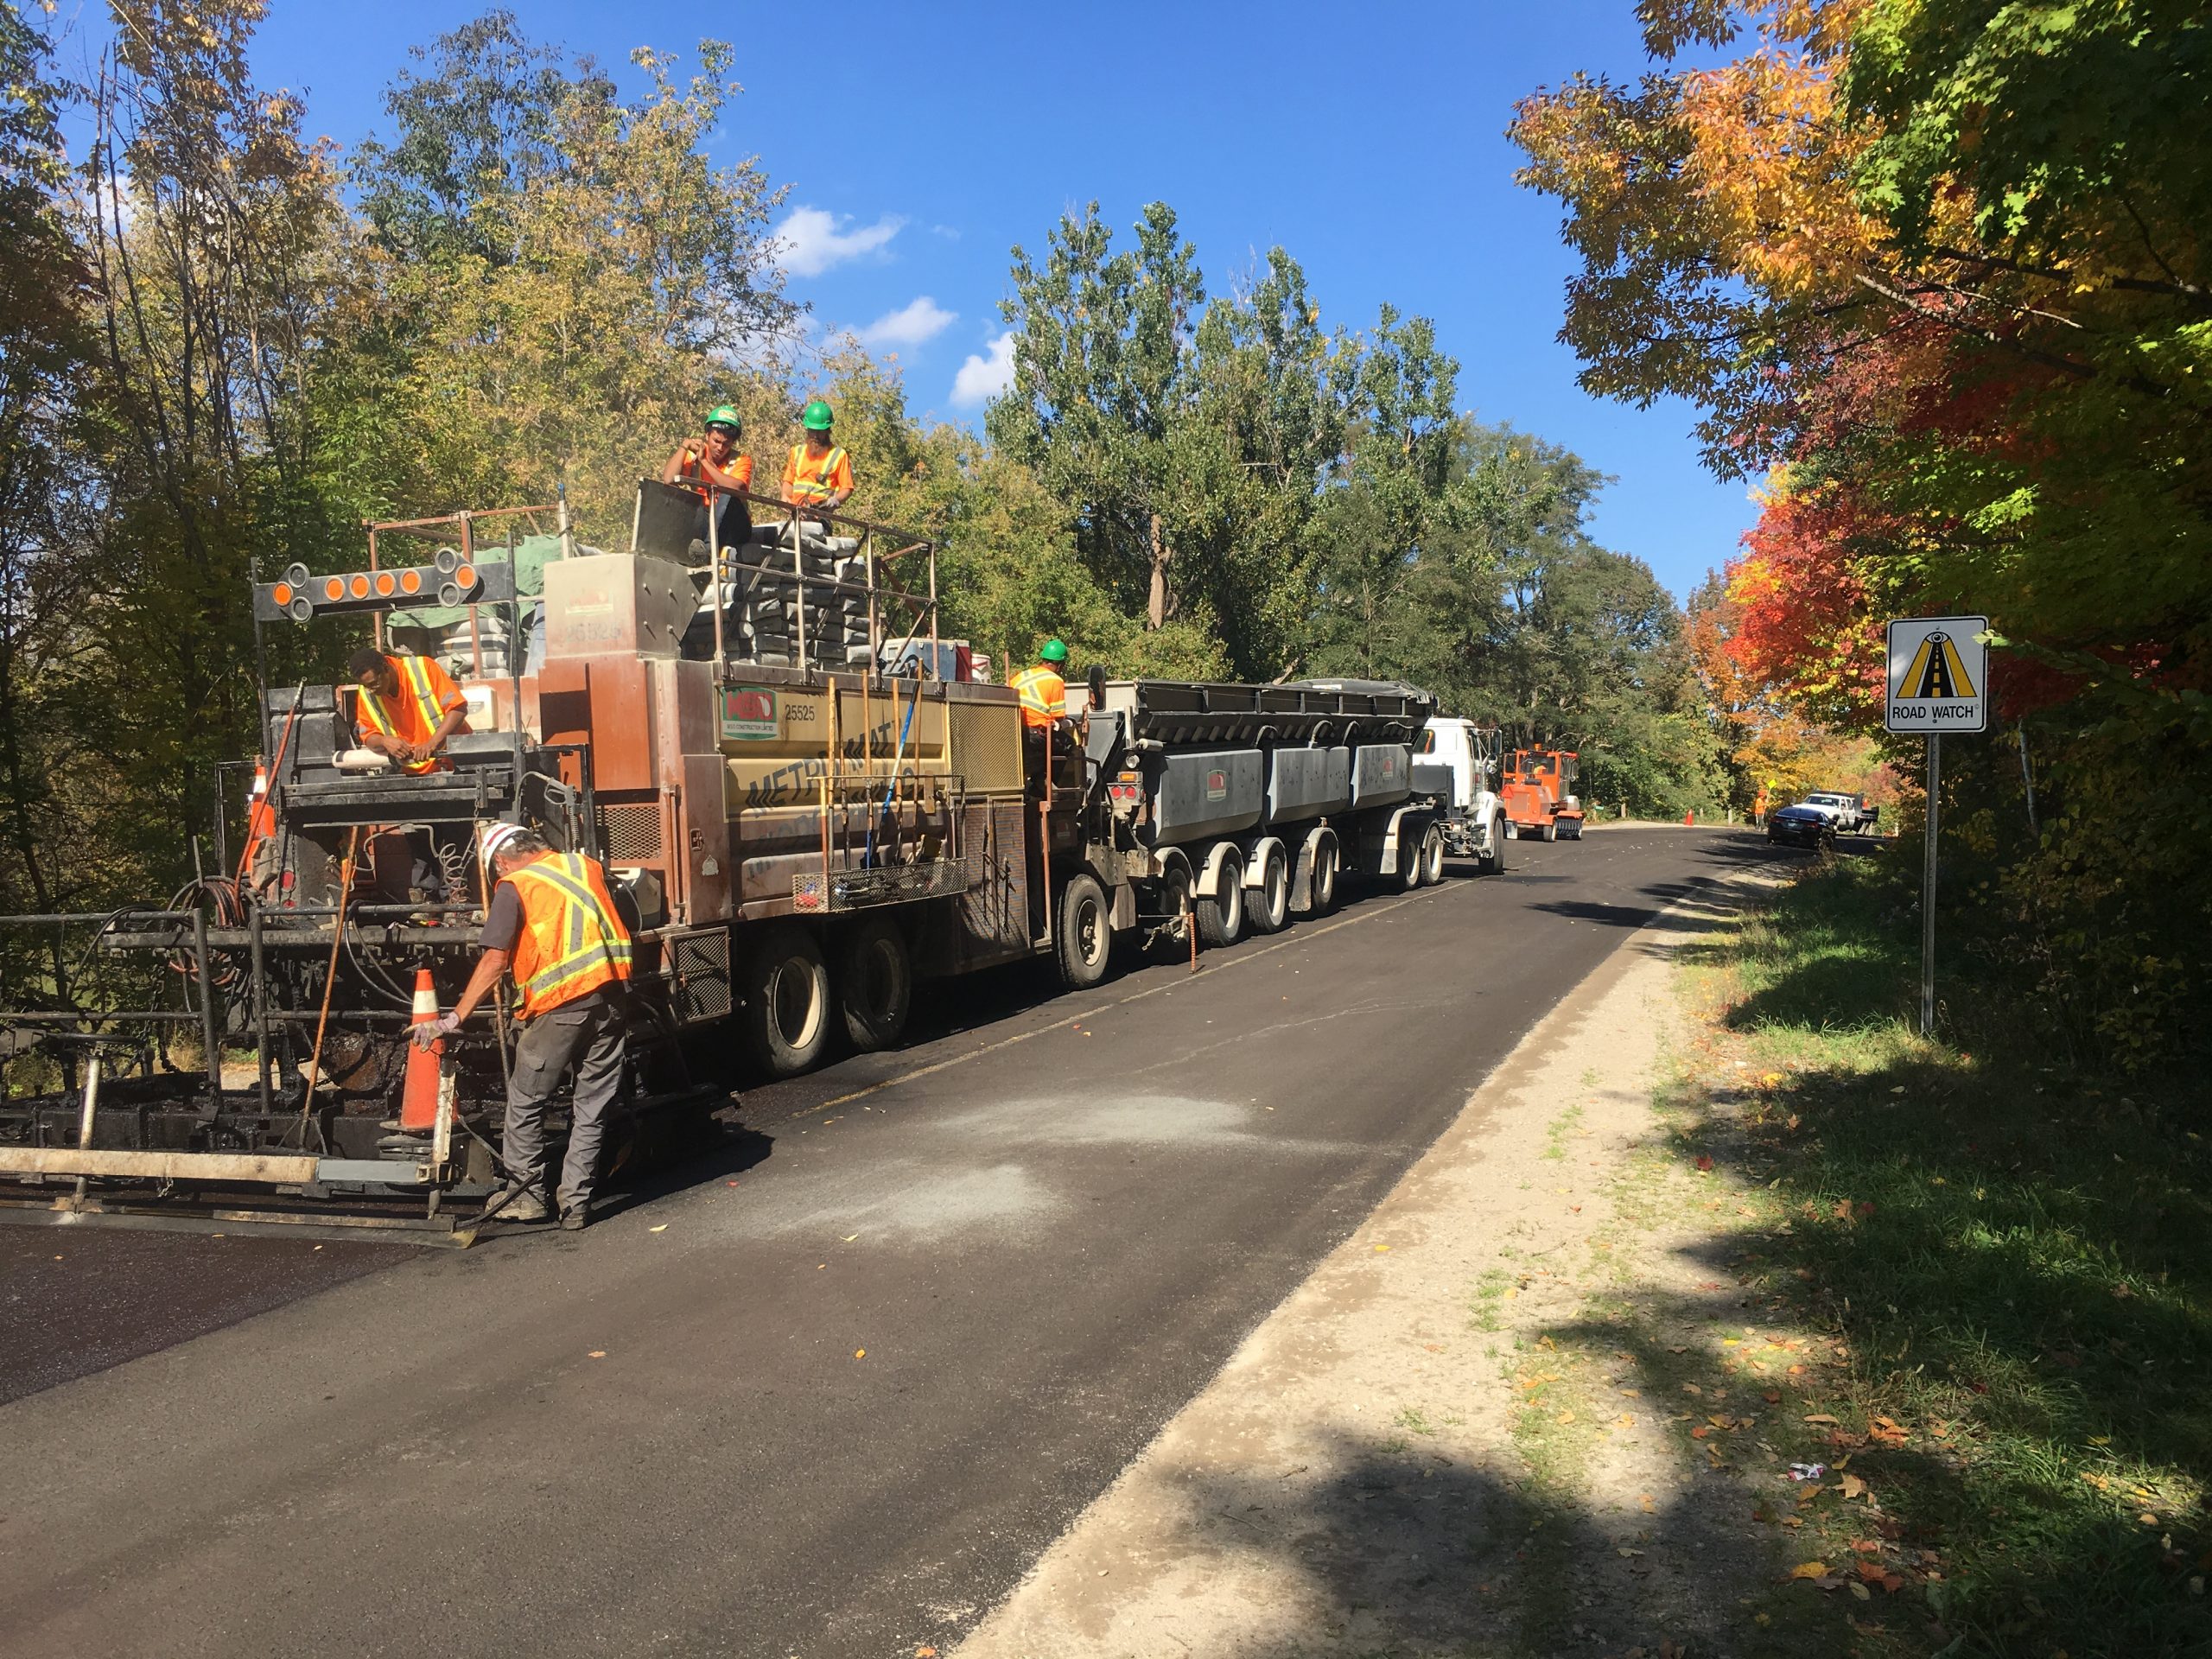 Paving equipment on a country road while workers are onsite supervising.